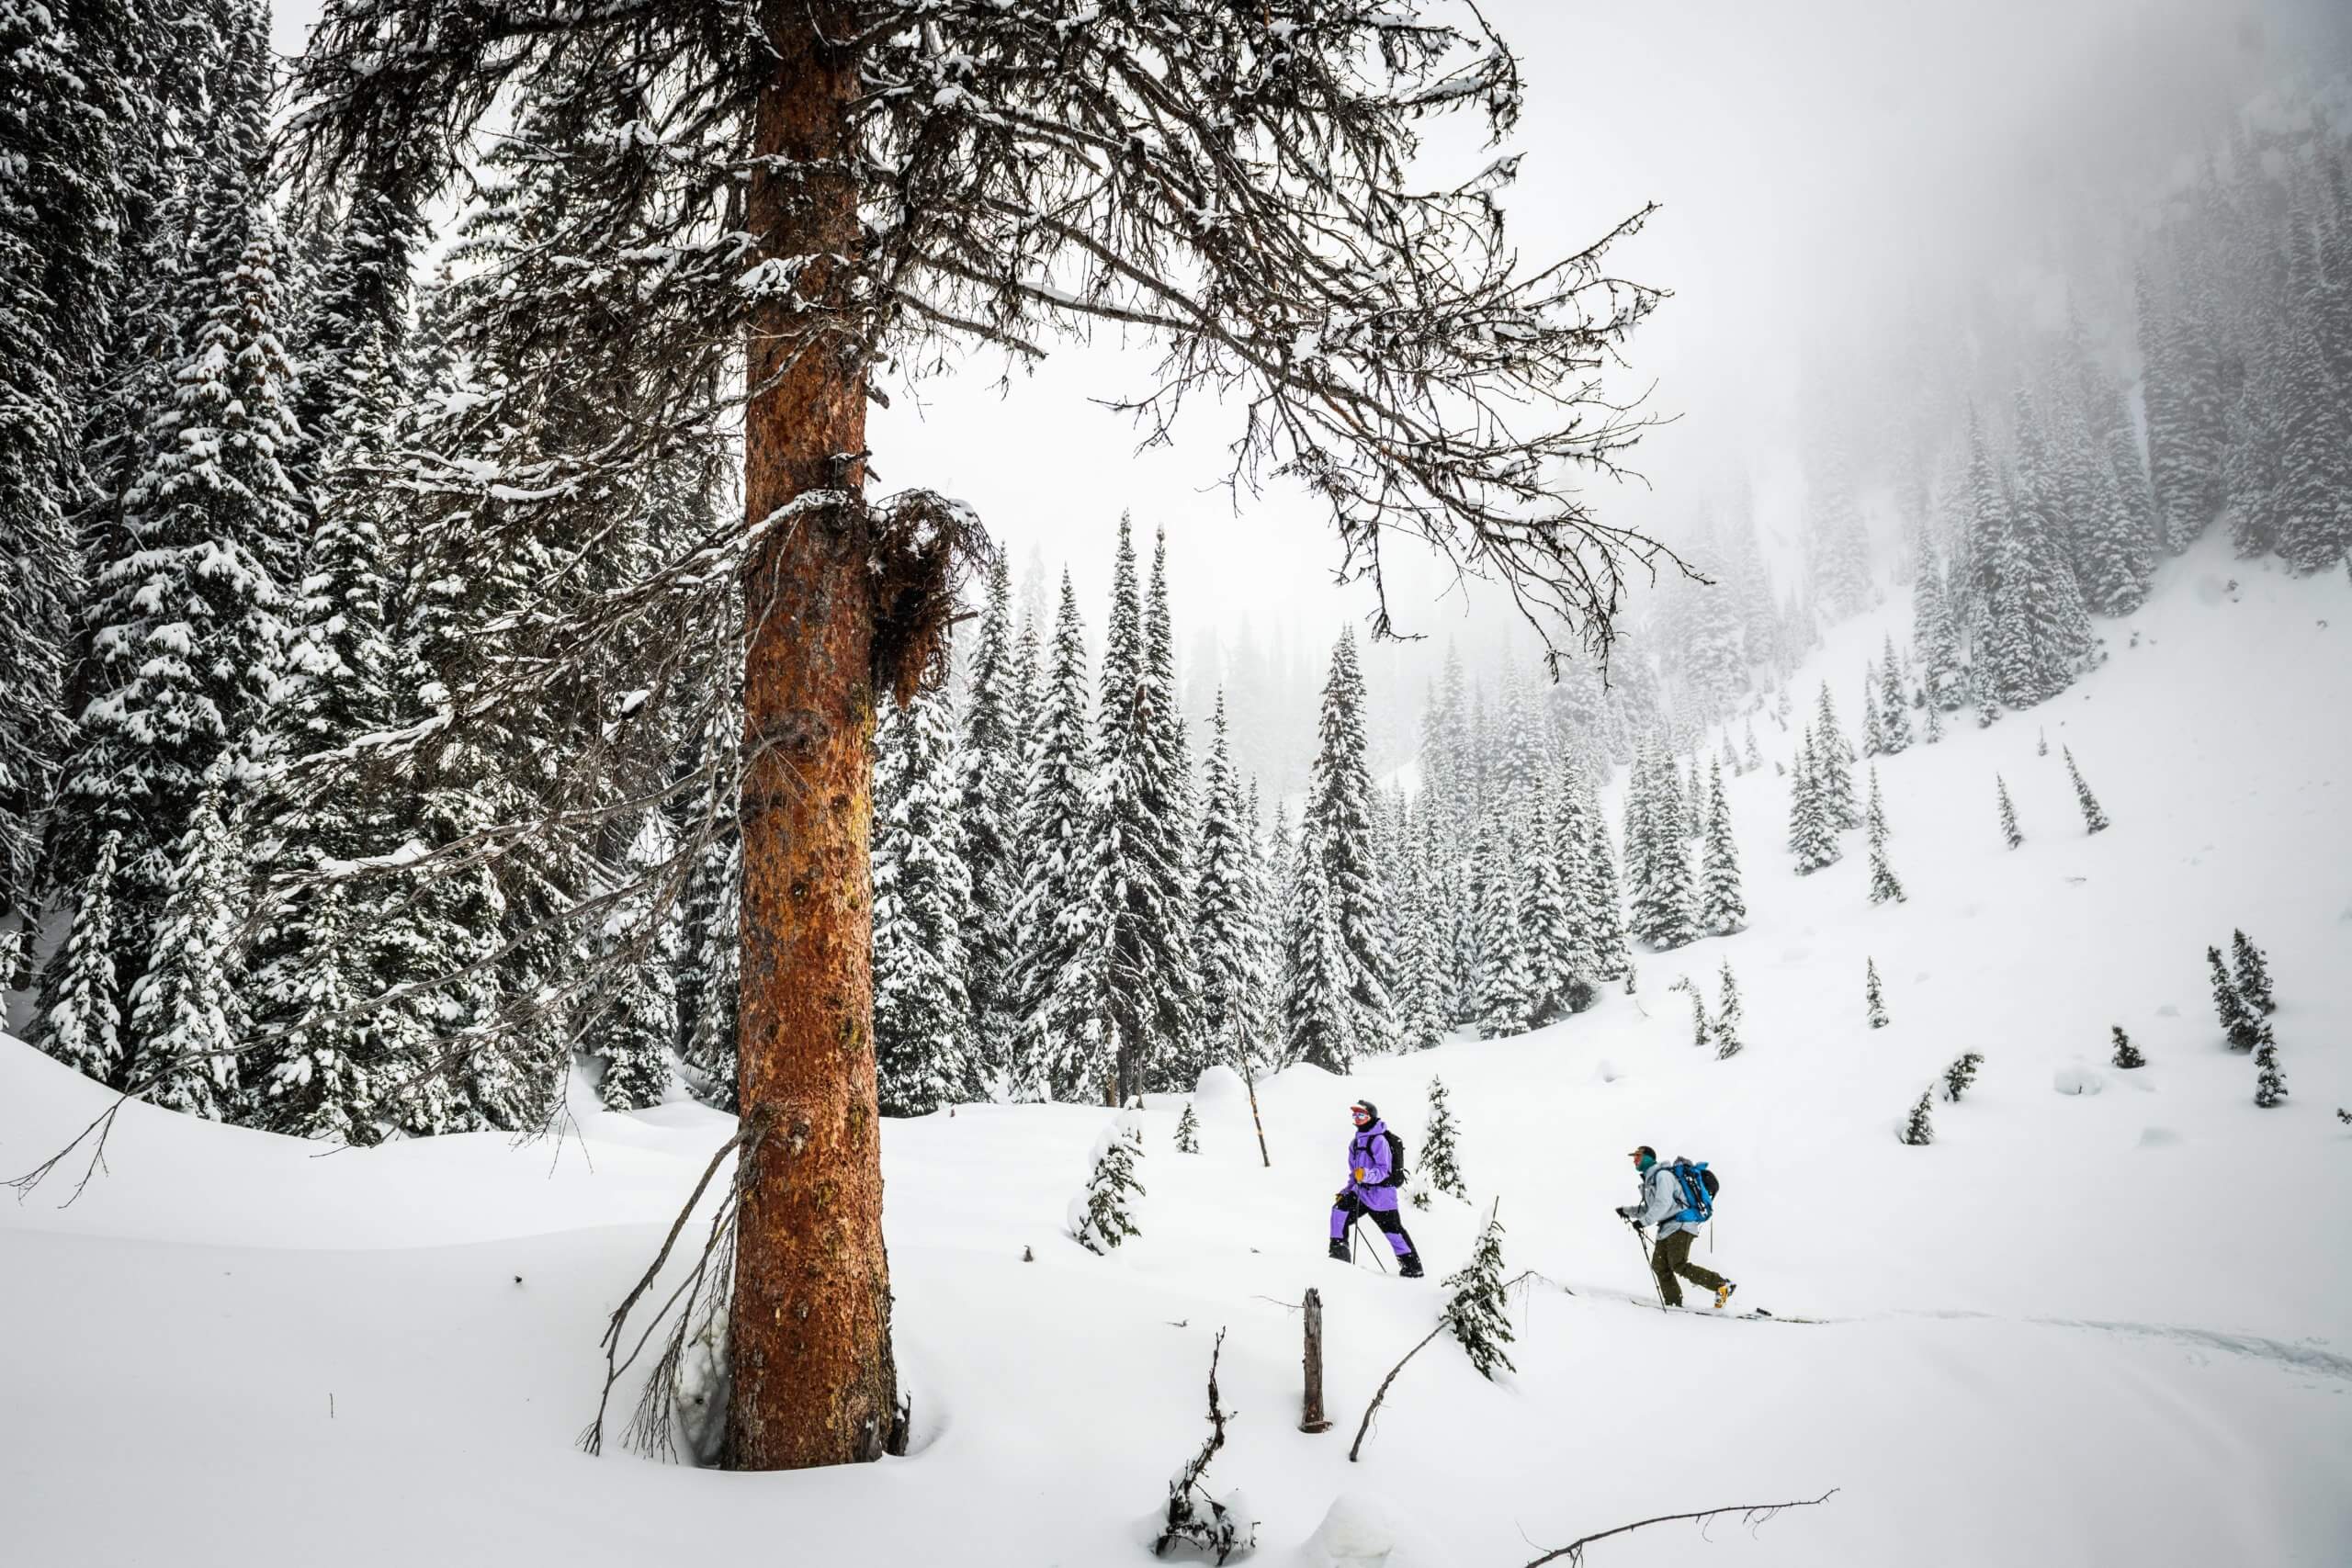 Hank Stowers and Ryan Collins touring in the backcountry.